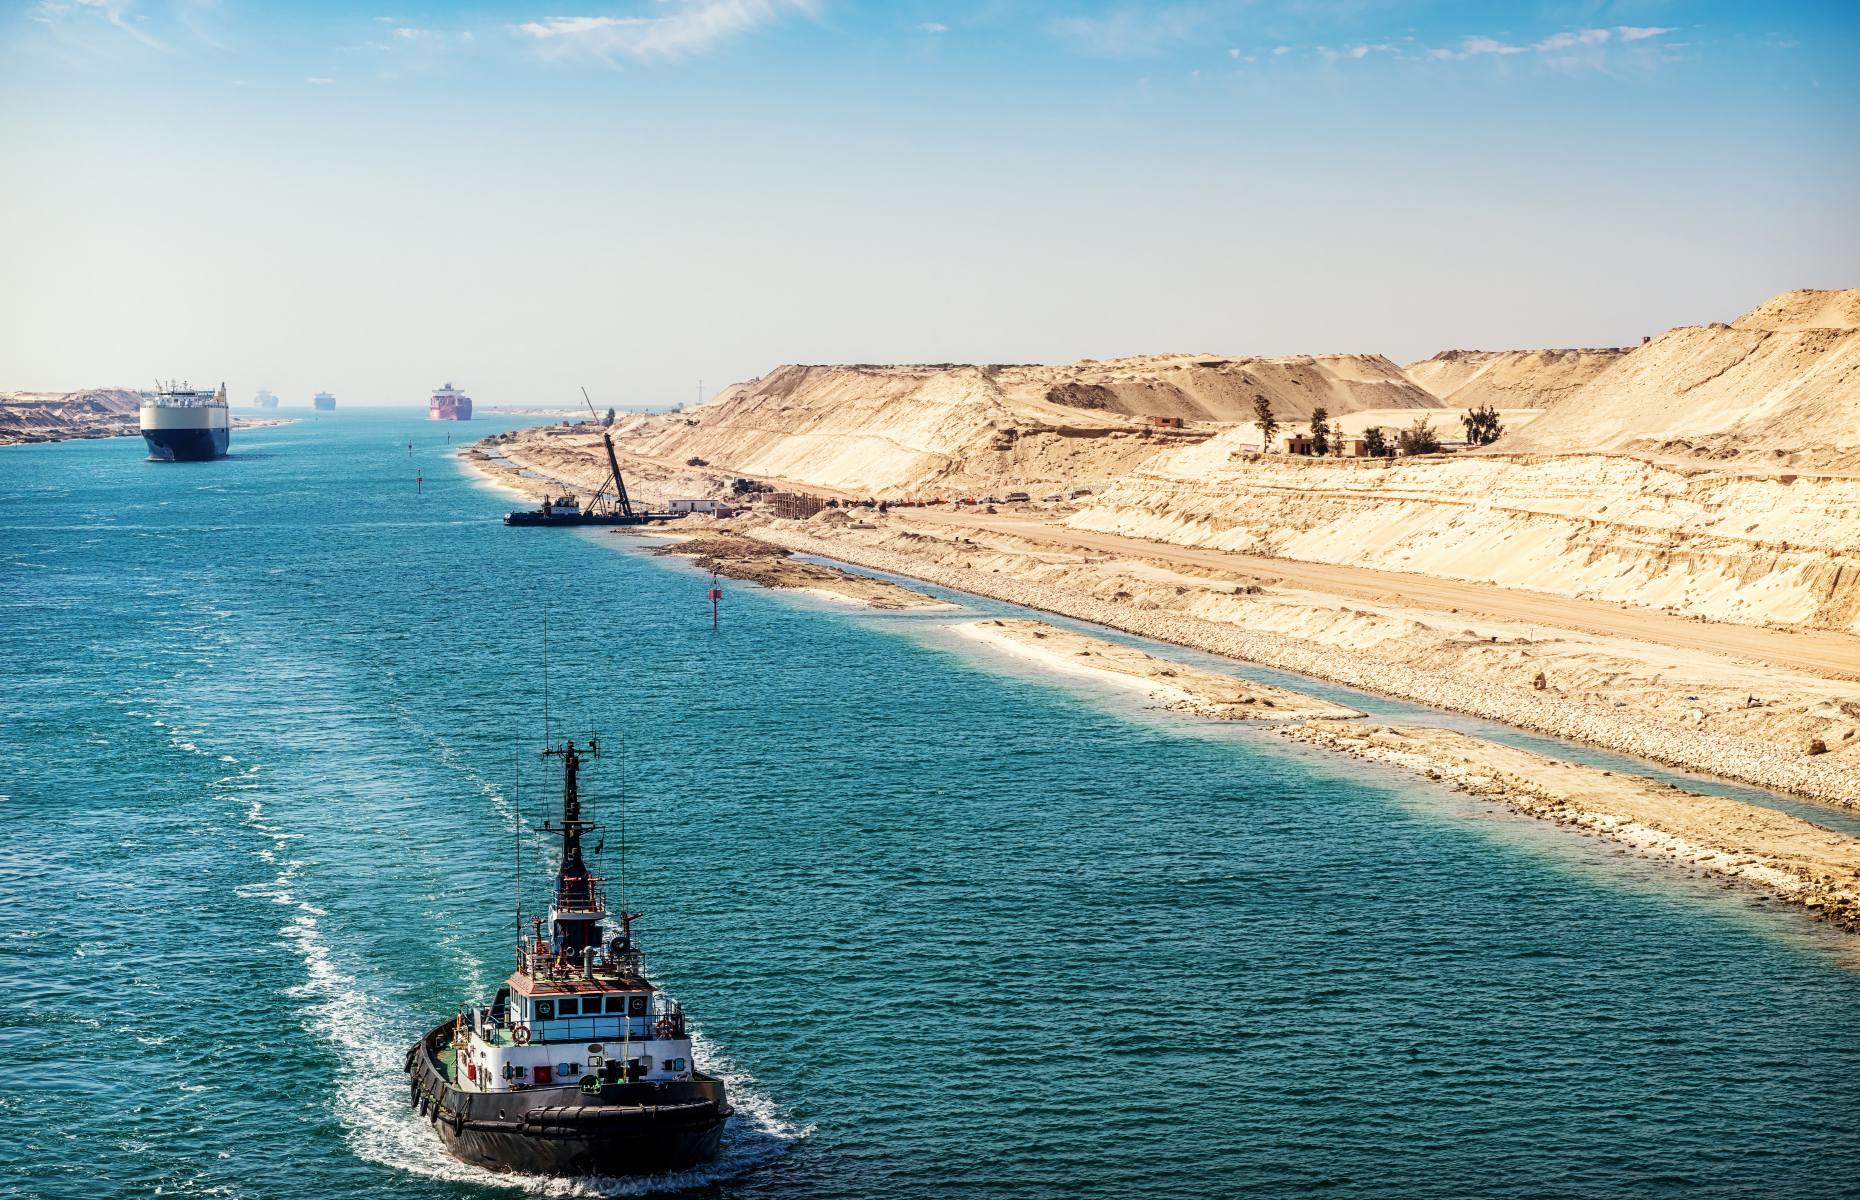 Known as the first canal to directly link the Mediterranean Sea to the Red Sea, Egypt’s iconic waterway dates back to the 19th century. First opened in 1869, the incredible canal took almost 10 years to build, acting as a border between the continents of Africa and Asia. Measuring roughly 120 miles (193km) long, the Suez Canal provides the shortest maritime route between Europe and the lands lying around the Indian Ocean and western Pacific Ocean.